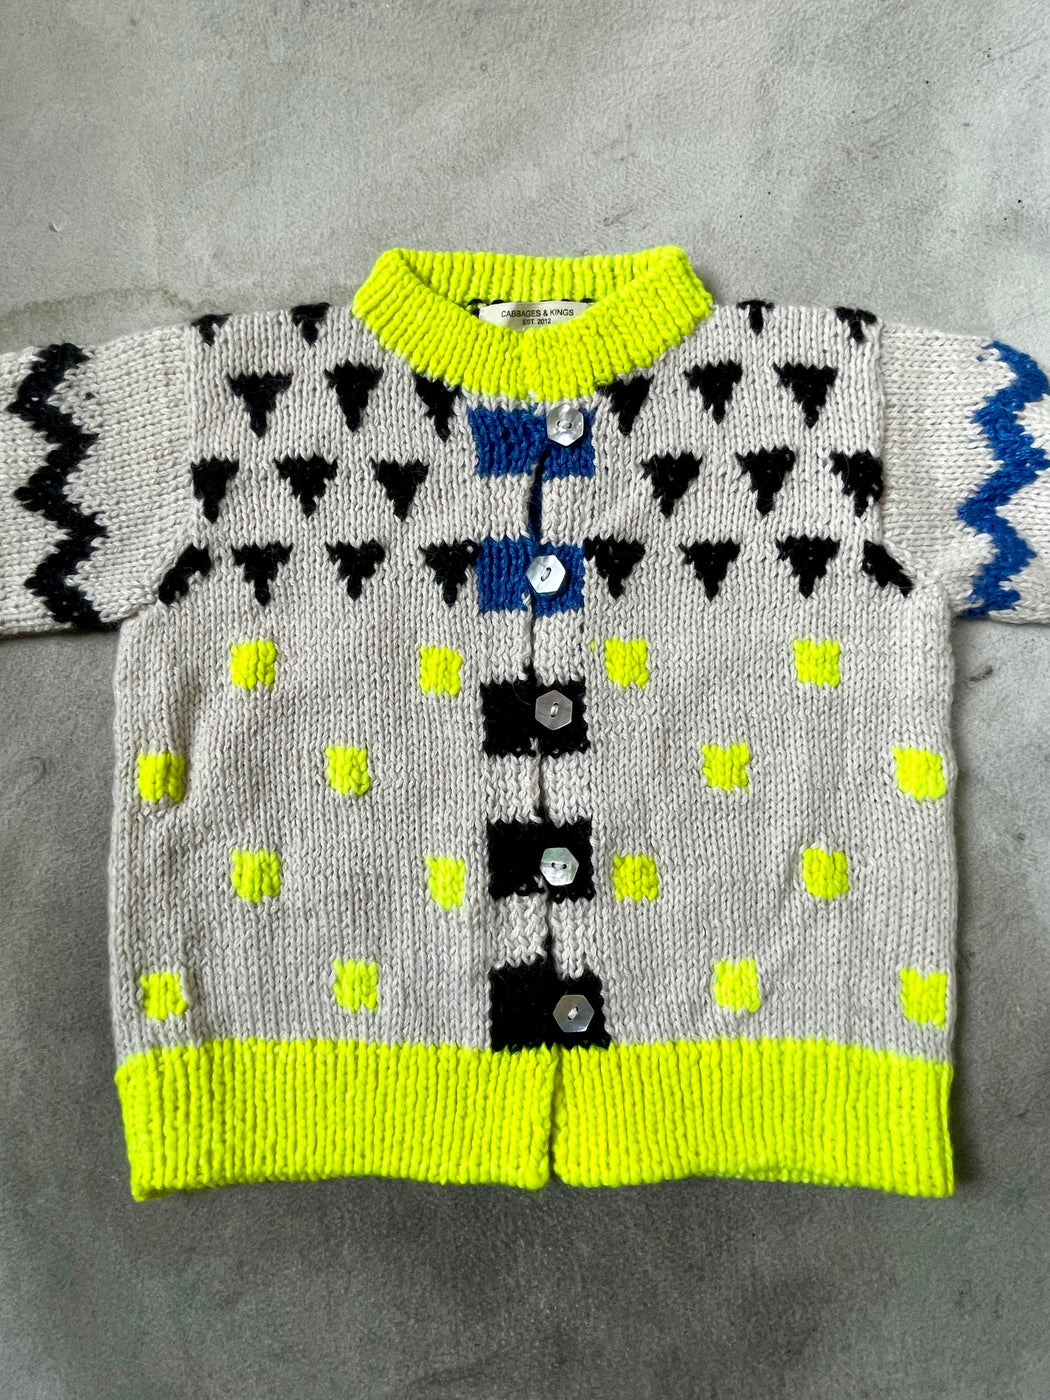 Cabbages & Kings "Museum" Sweater (1 - 2 years)